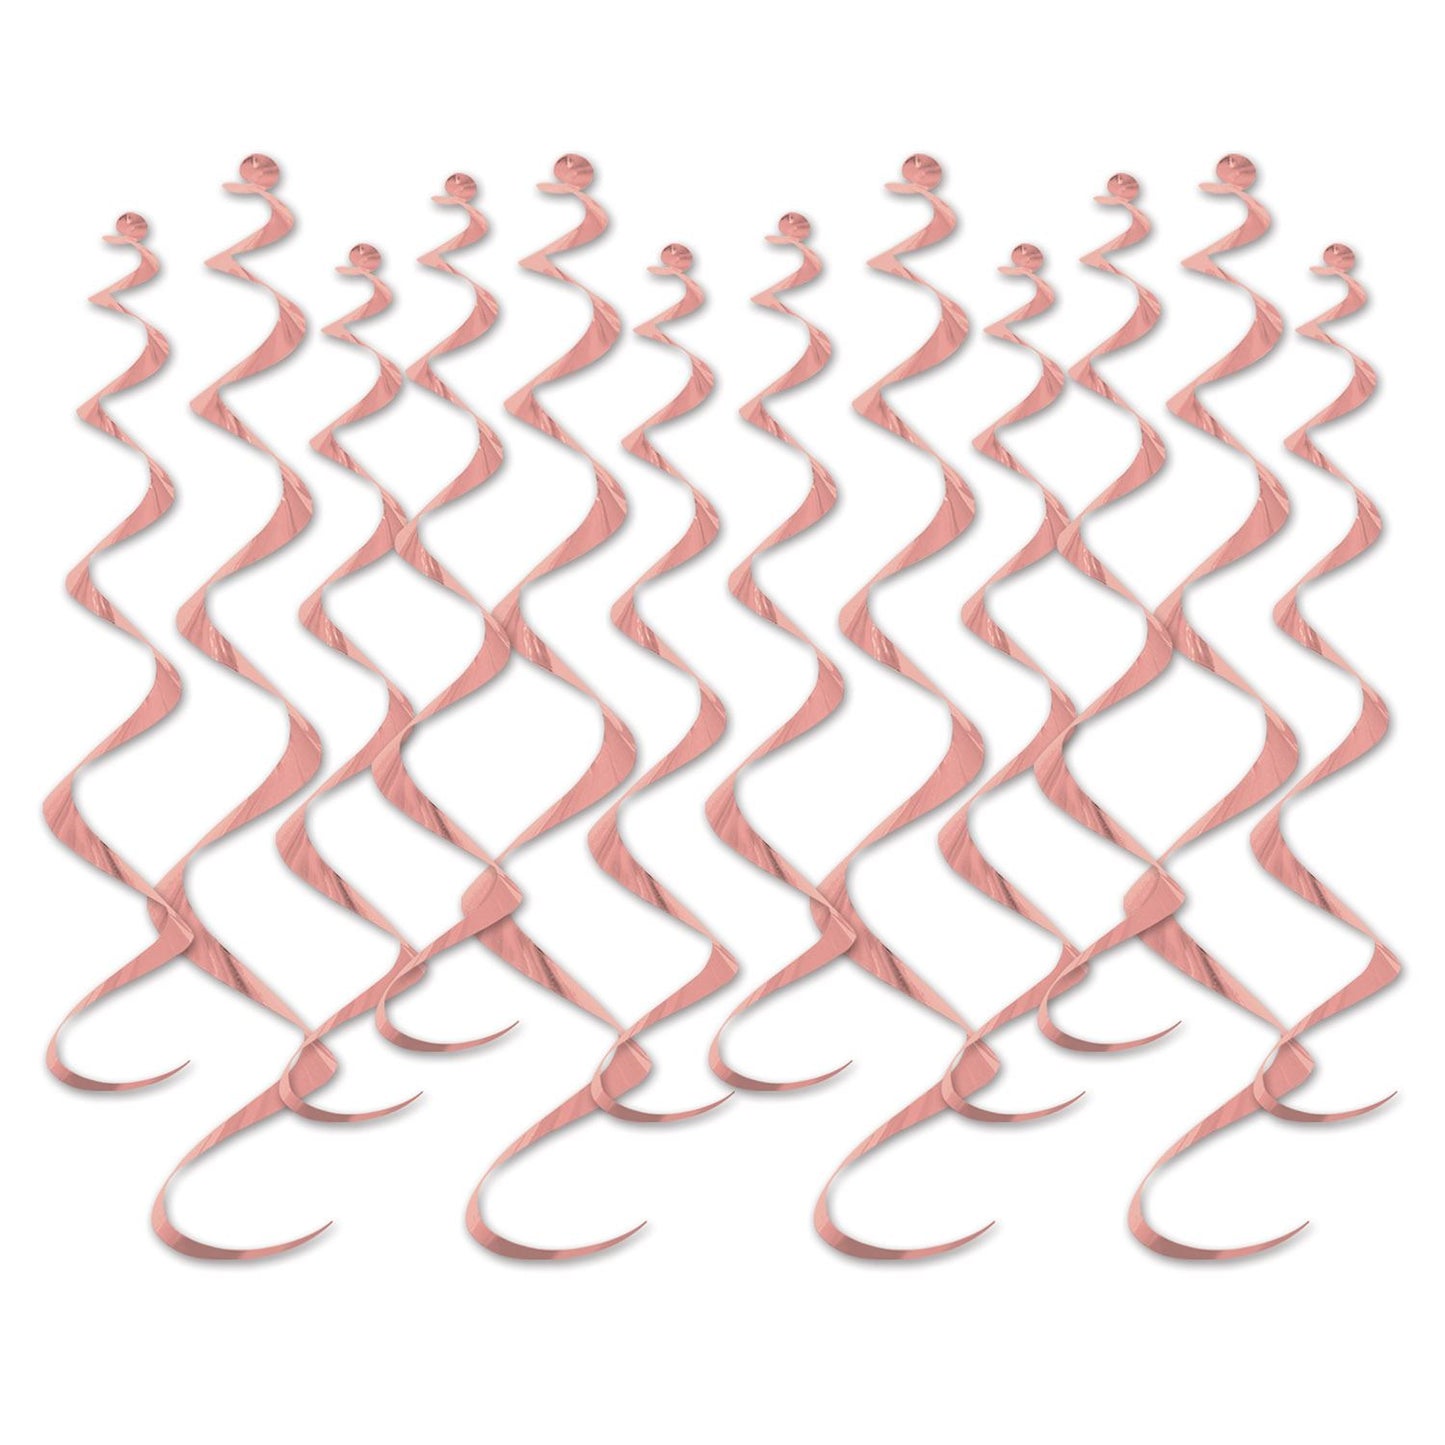 Beistle Metallic Whirls - Rose Gold - Party Supply Decoration for General Occasion